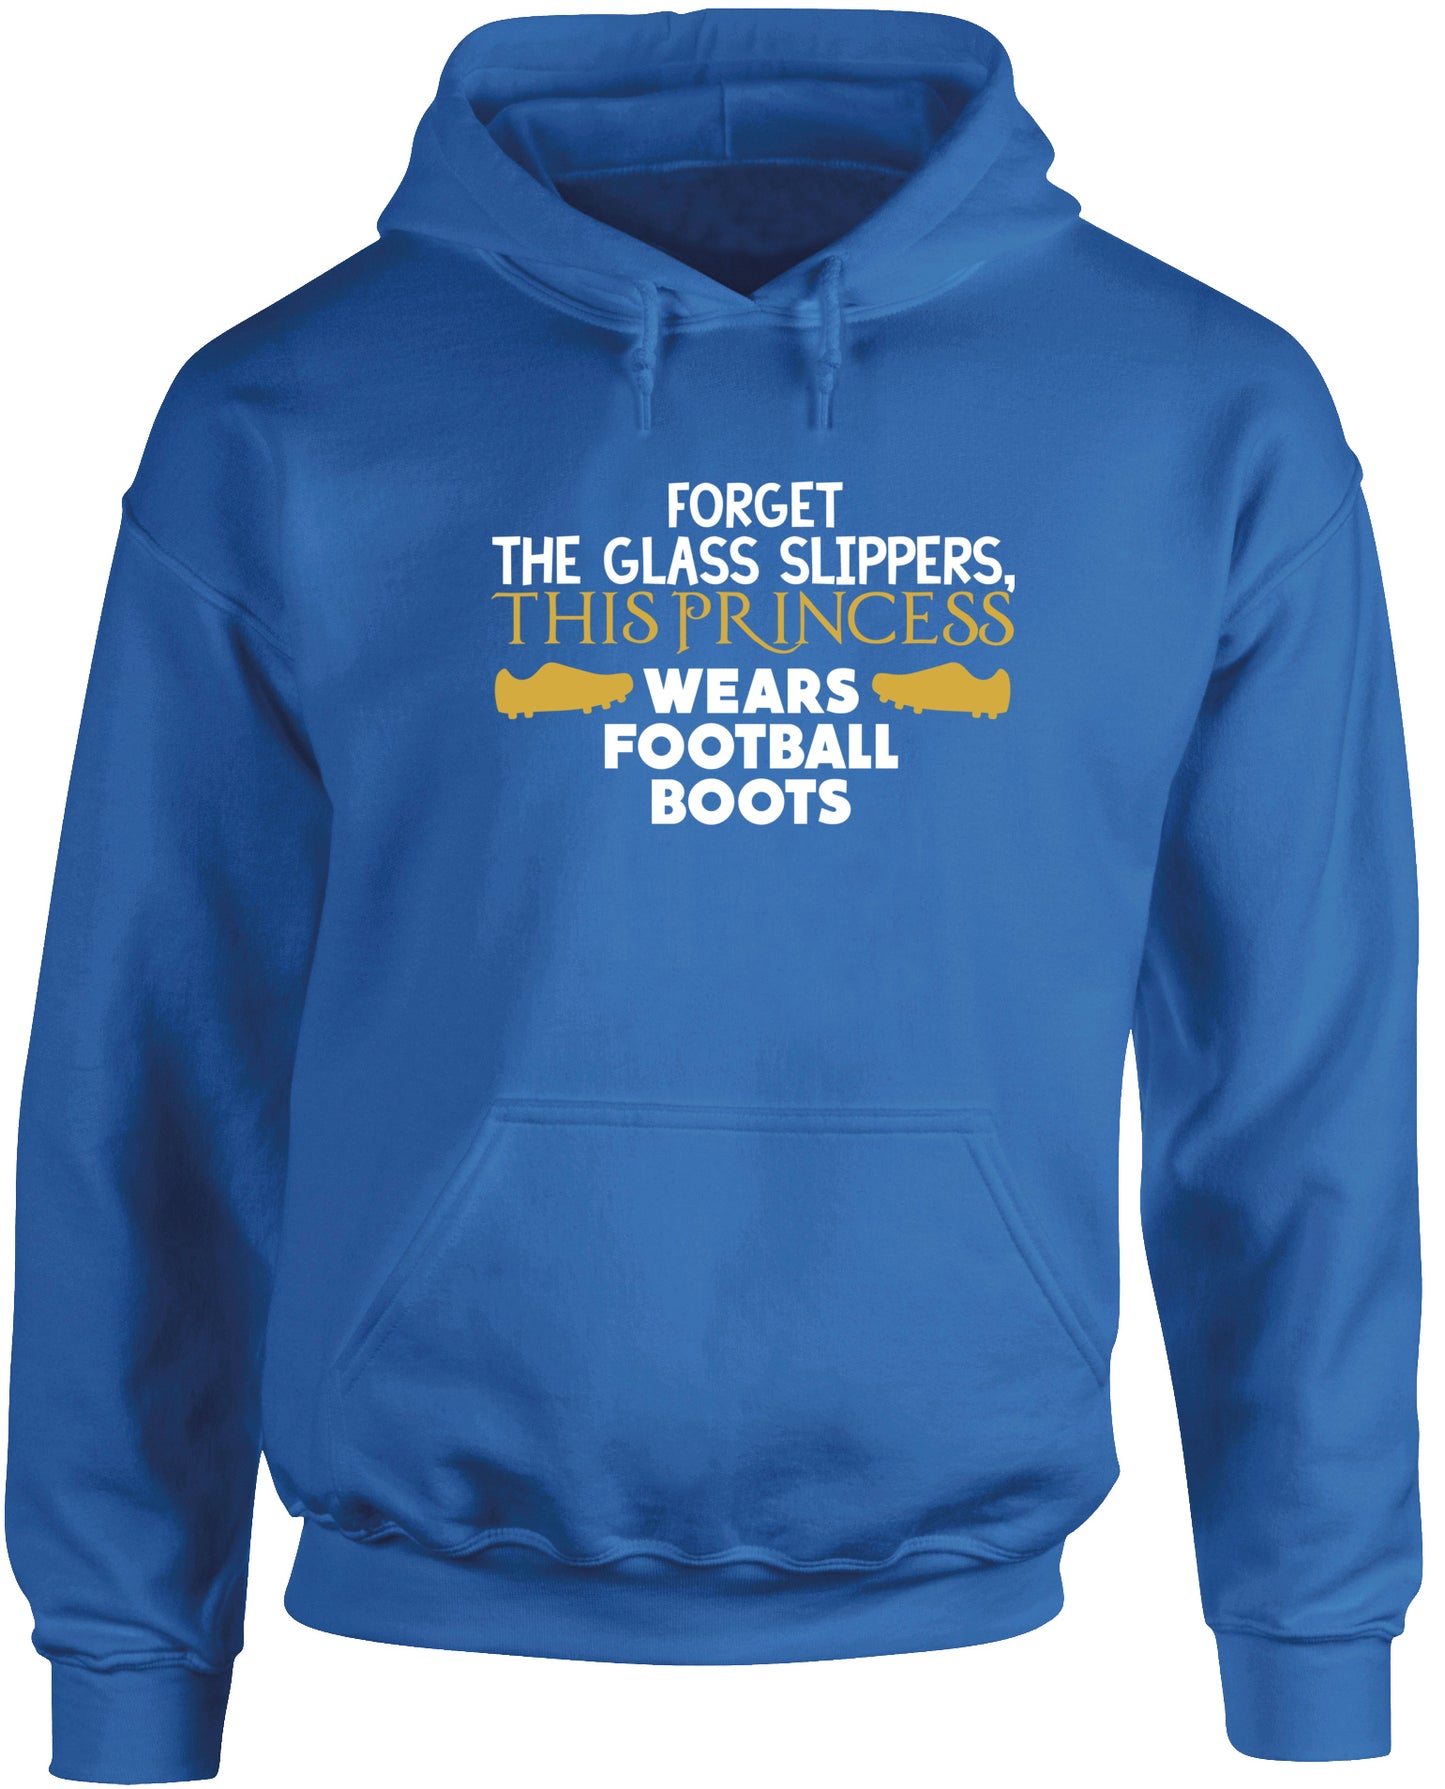 Forget the glass slippers, This princess wears football boots unisex Hoodie hooded top